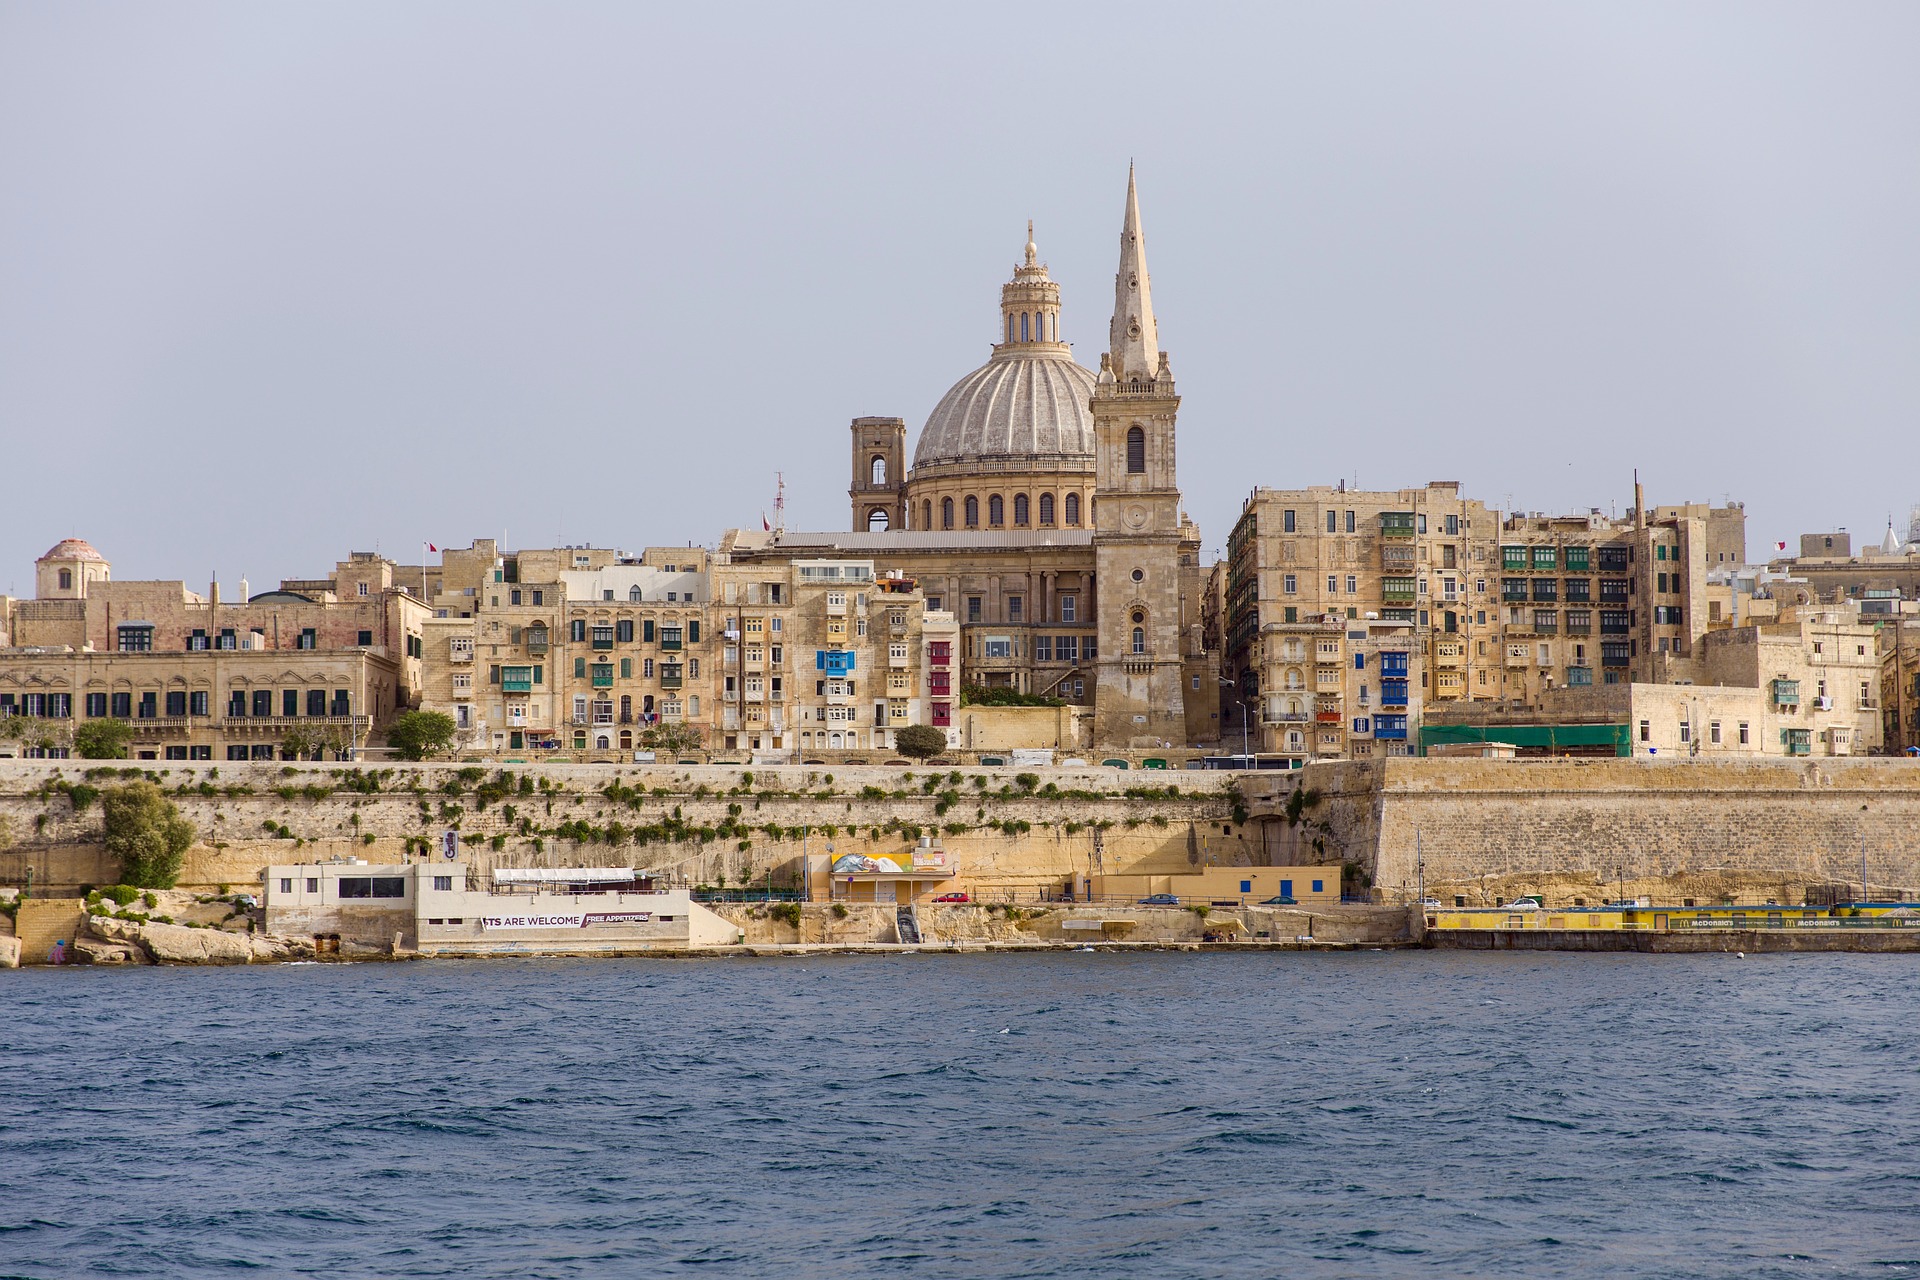 Basilica of Our Lady of Mount Carmel, Valletta